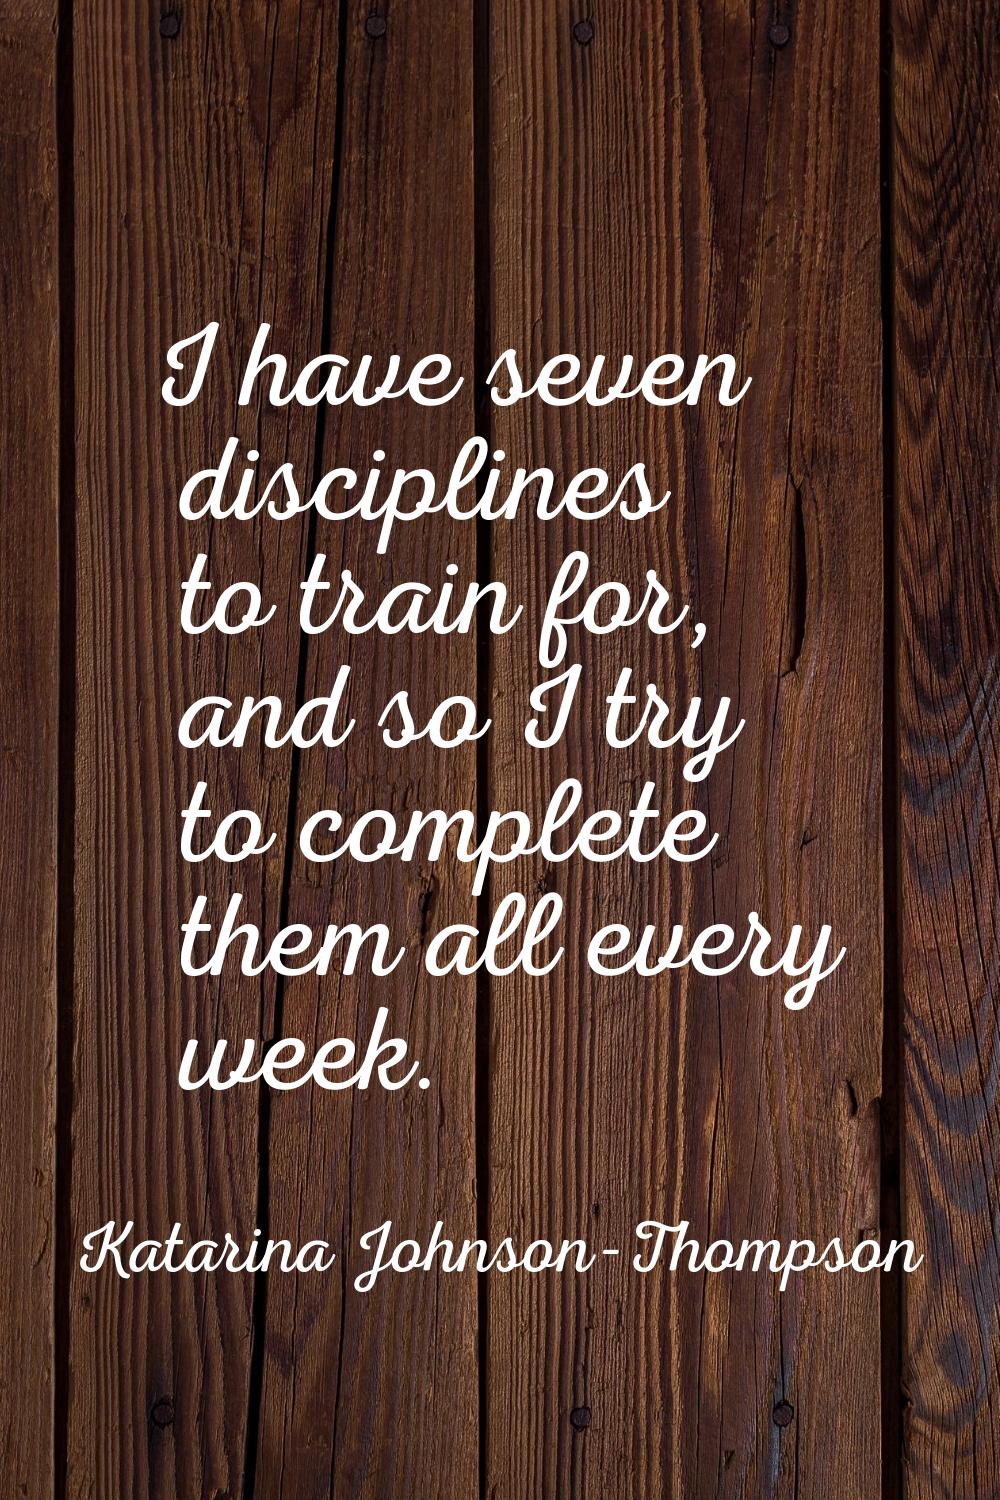 I have seven disciplines to train for, and so I try to complete them all every week.